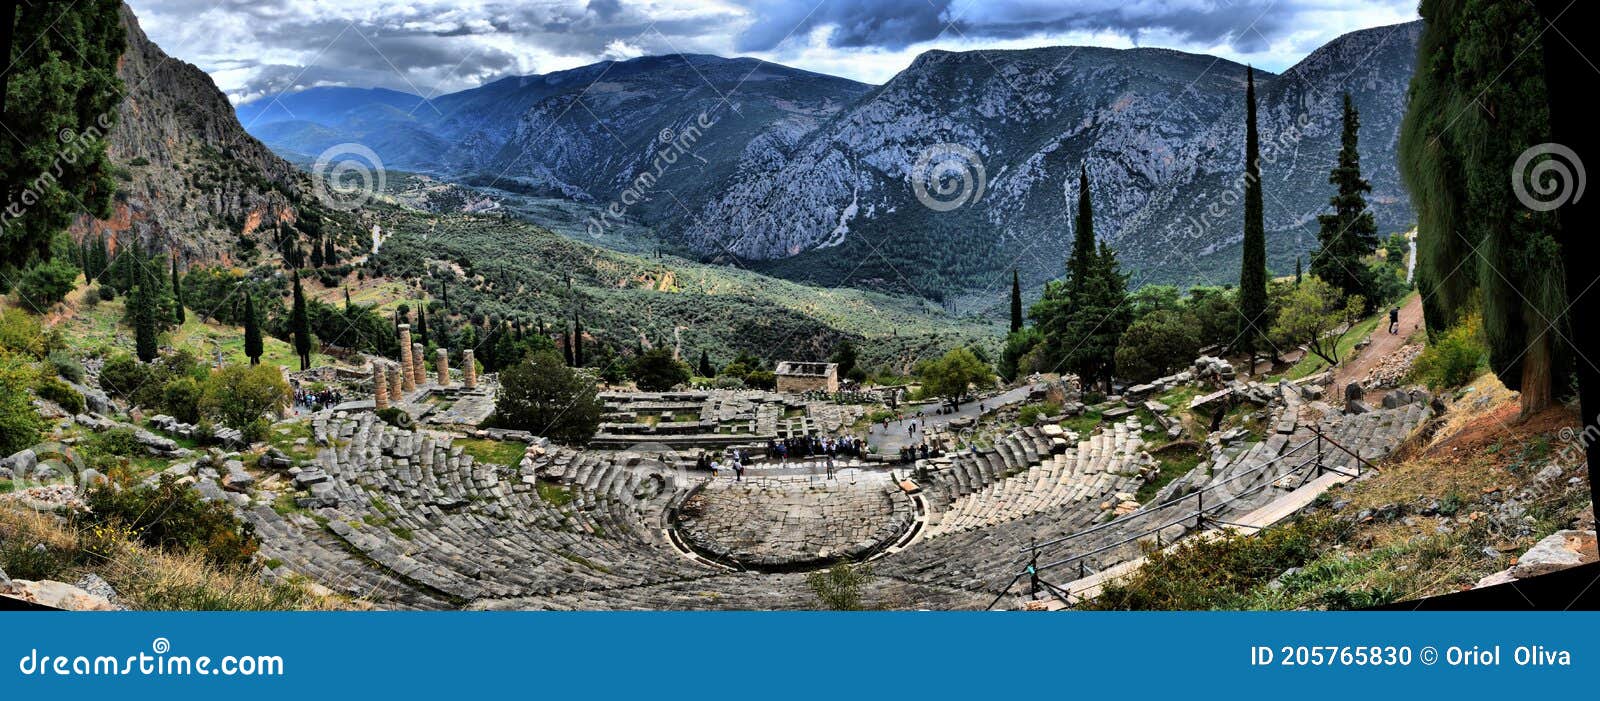 view of the main monuments and sites of greece. meteora. delphi. delphi theater.